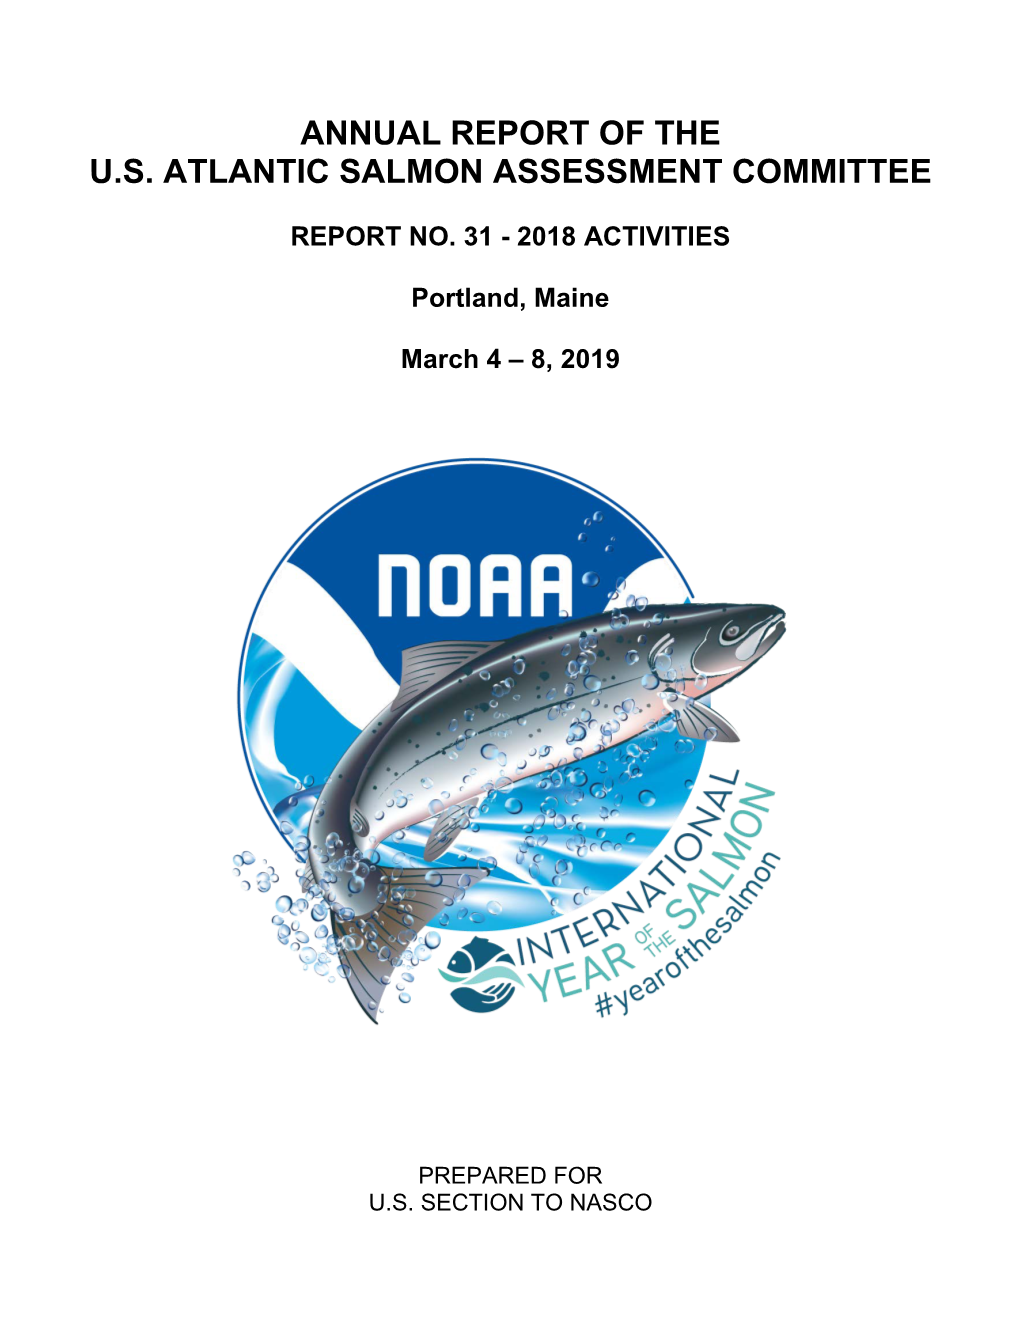 Annual Report of the U.S. Atlantic Salmon Assessment Committee